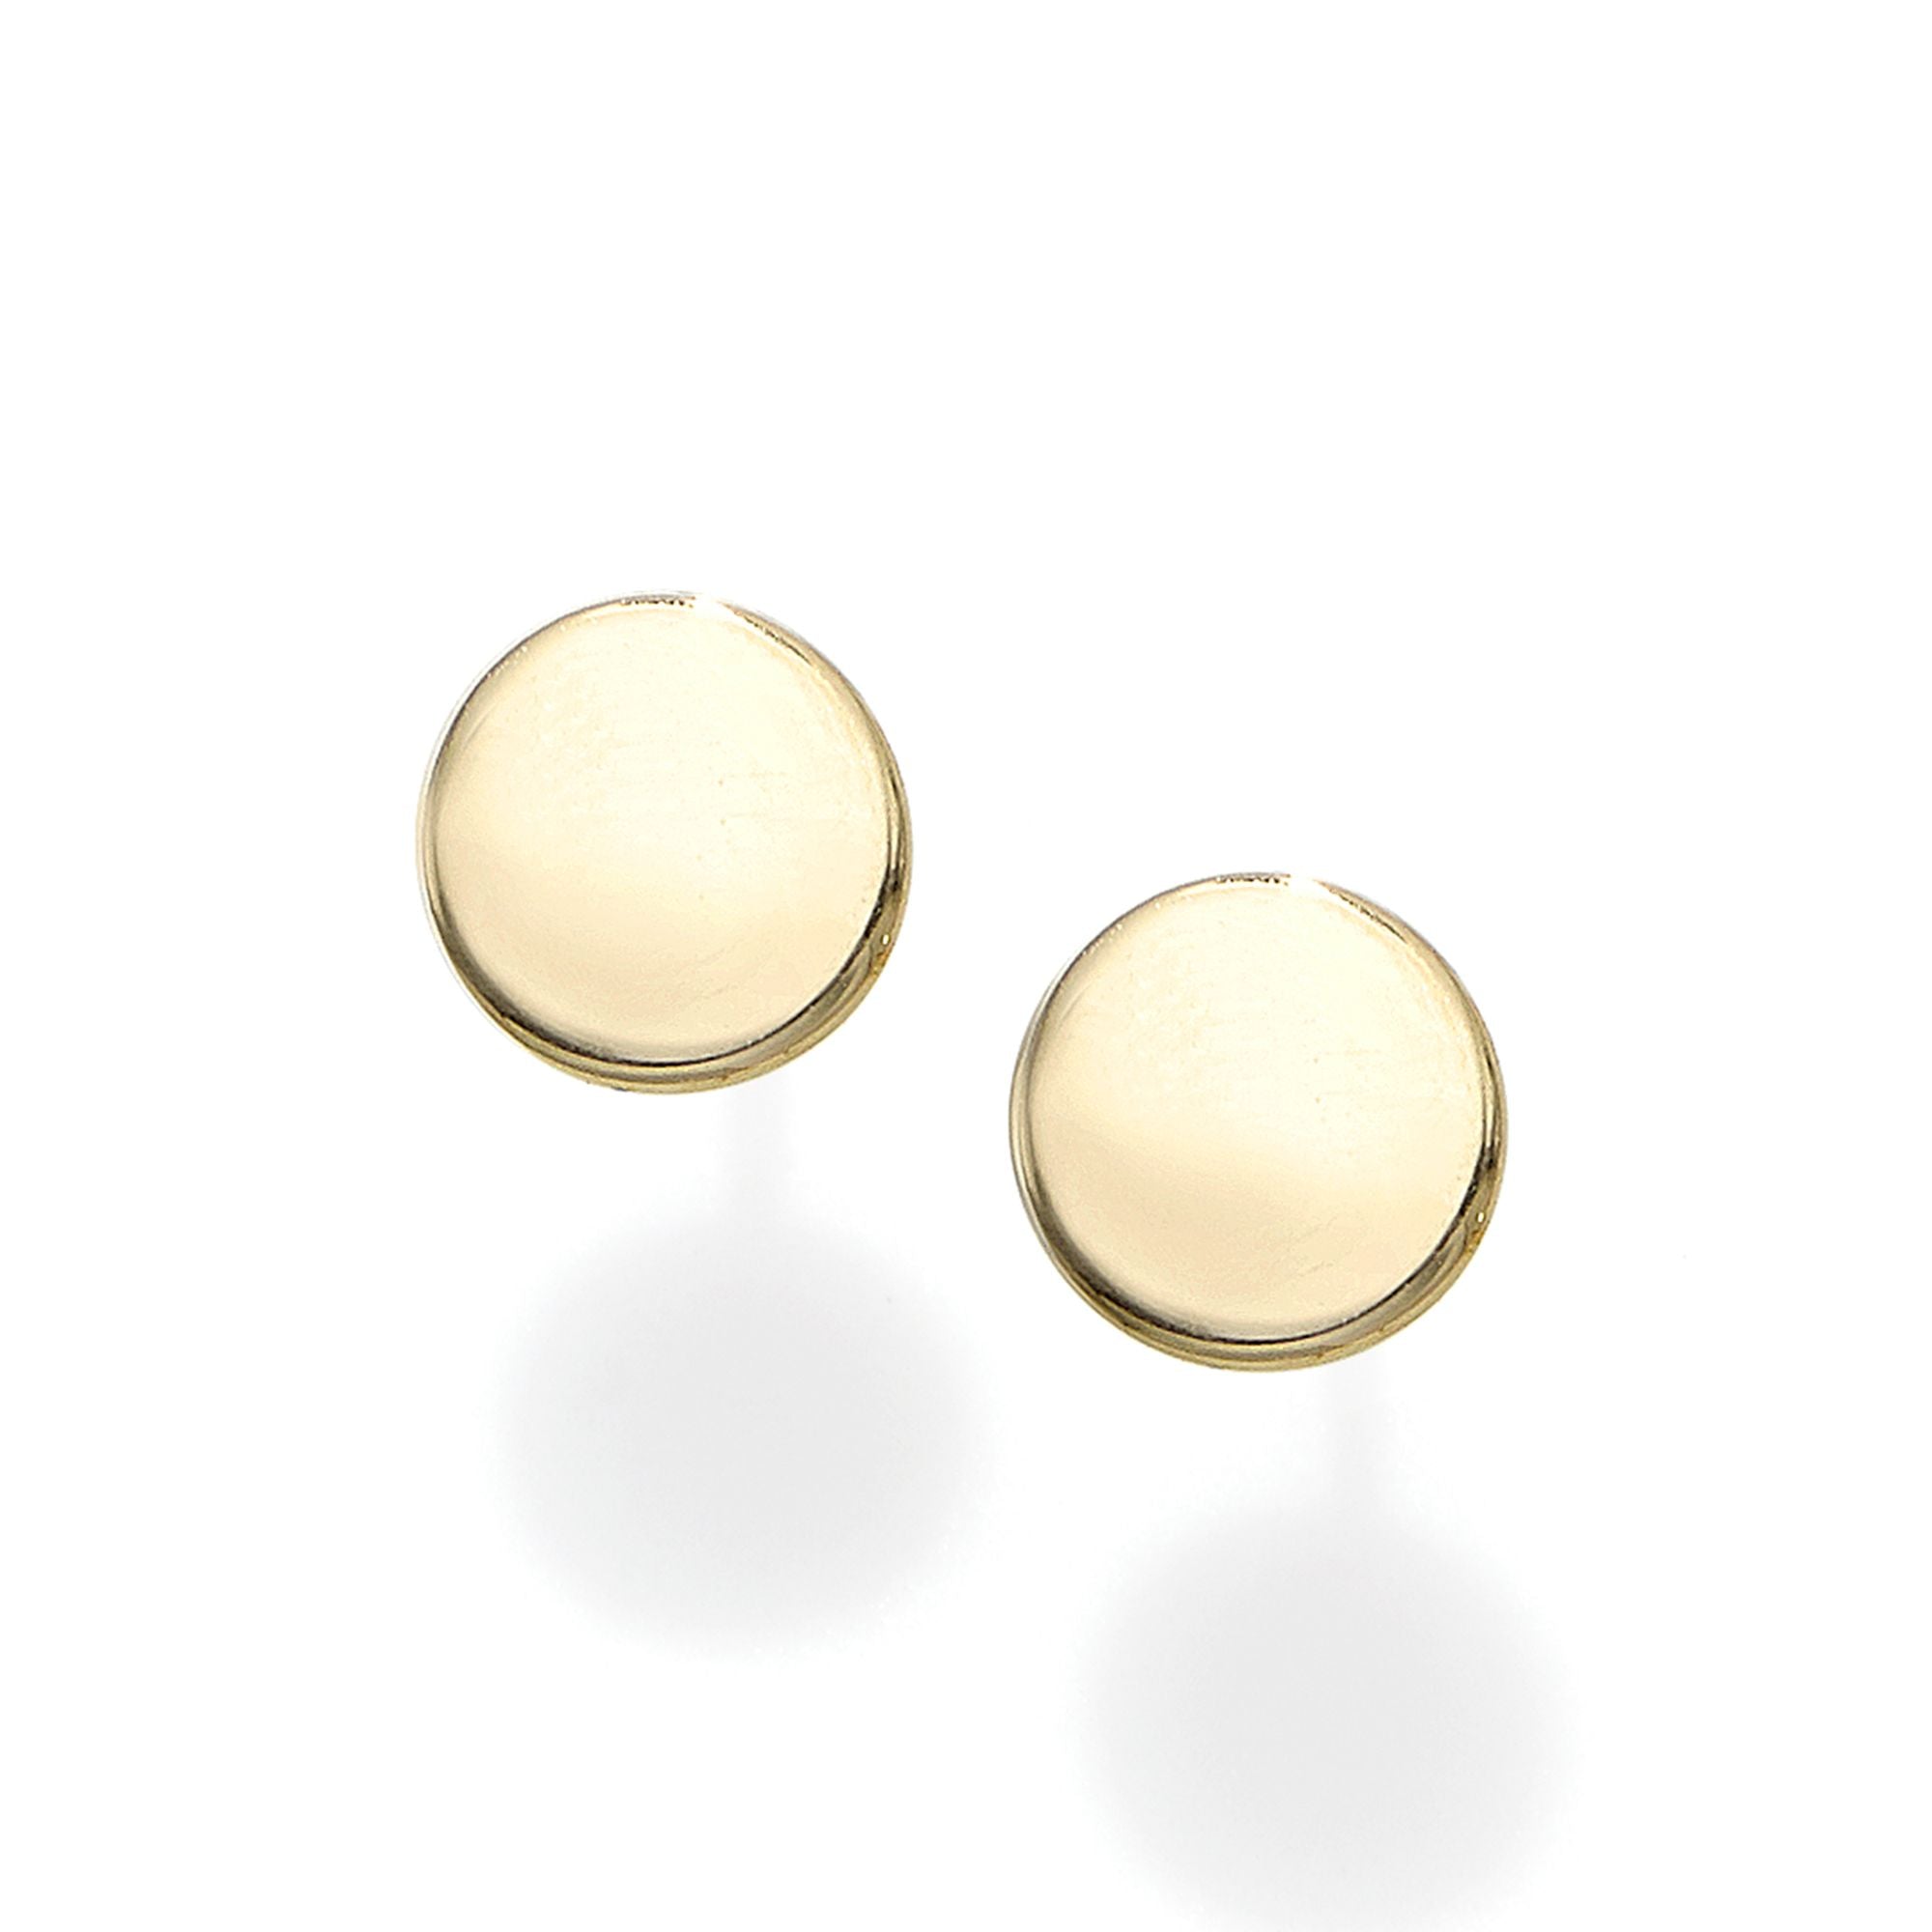 Minimalist Solid Yellow Gold Polished Geometric Round Post Earrings with Push Back Stud - wingroupjewelry